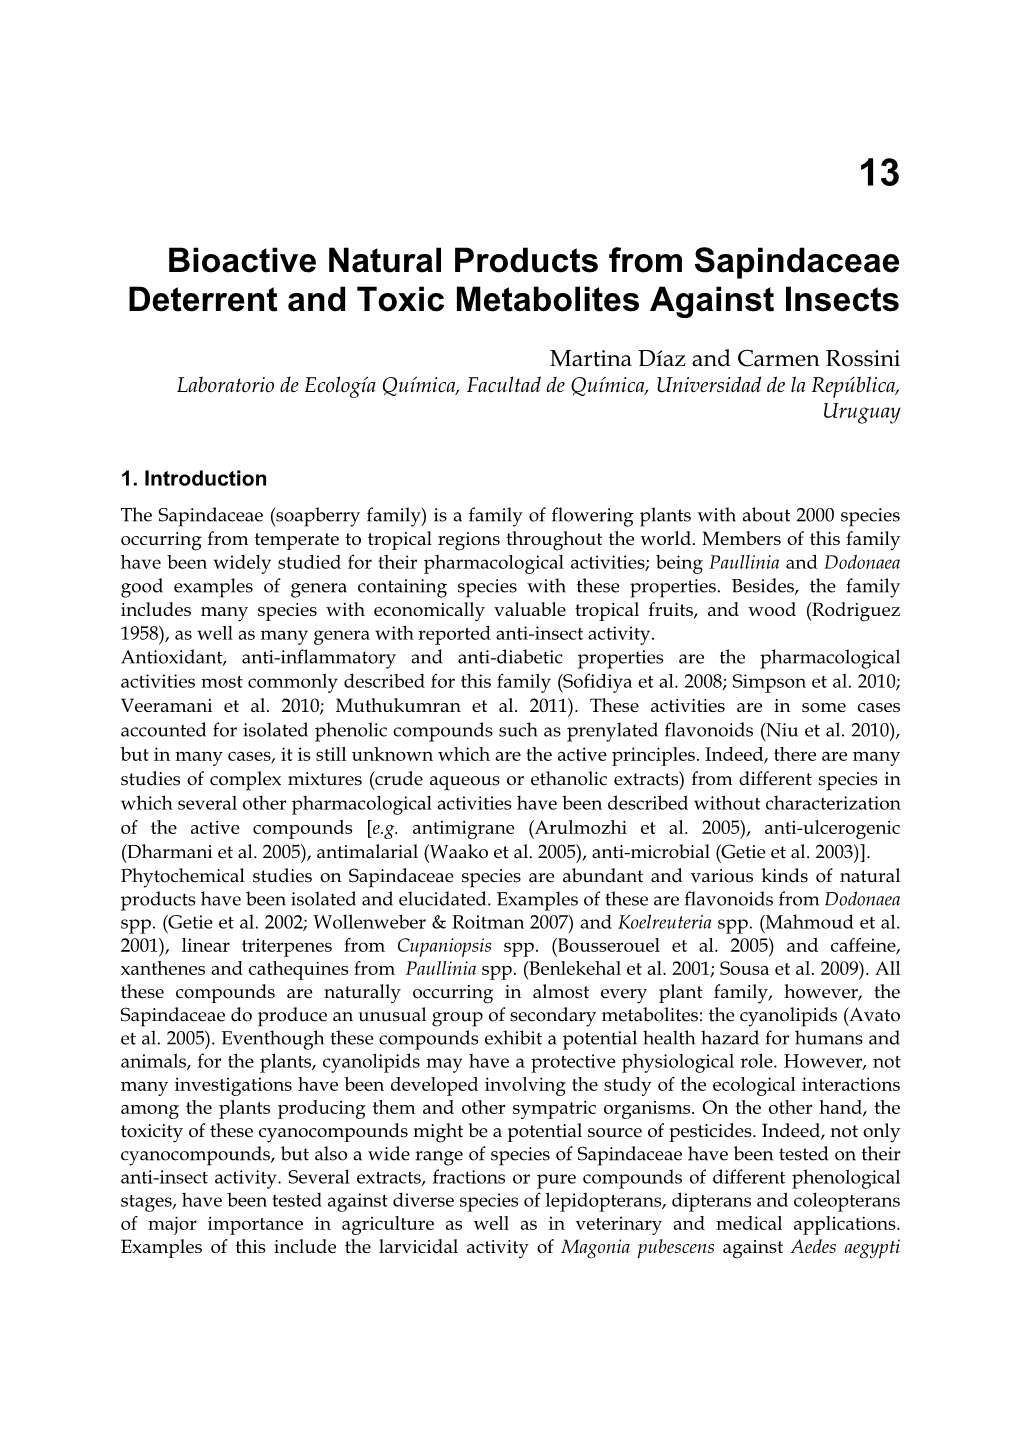 Bioactive Natural Products from Sapindaceae Deterrent and Toxic Metabolites Against Insects